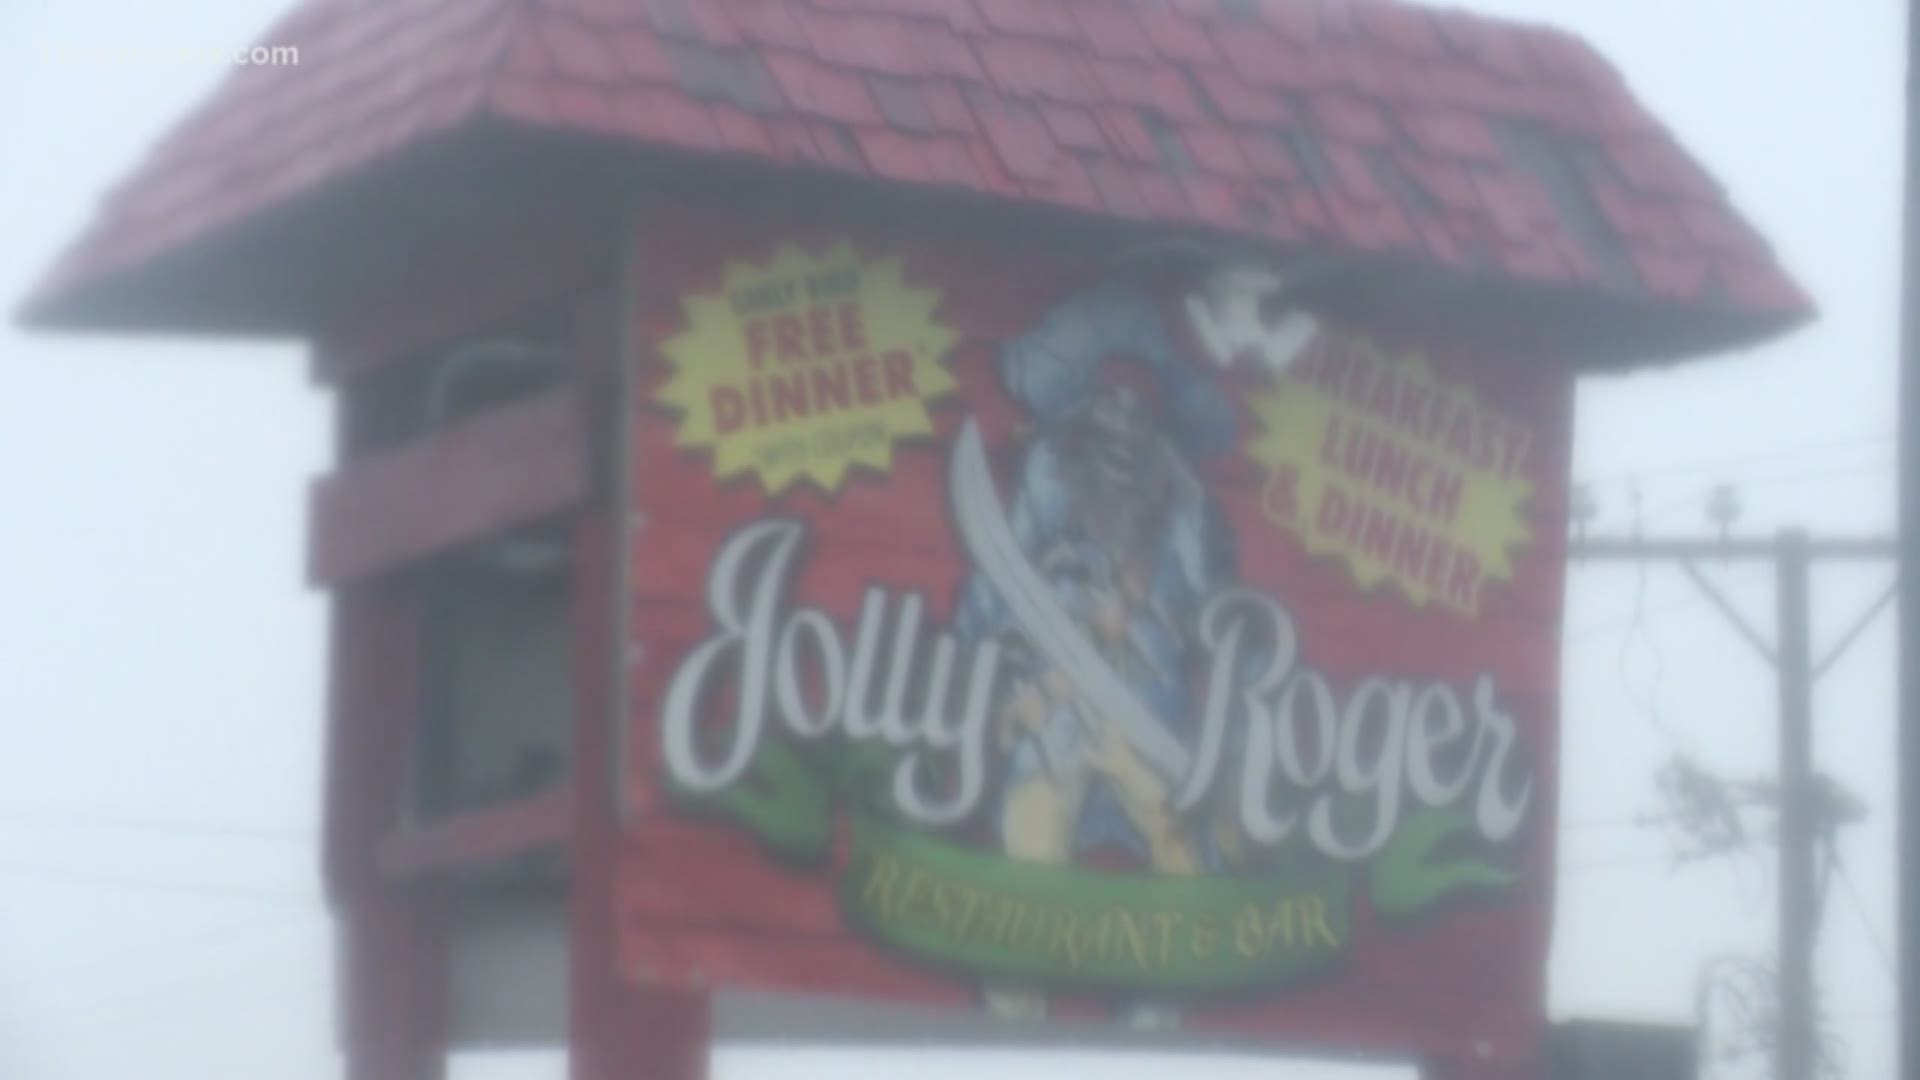 Home - Jolly Roger OBX